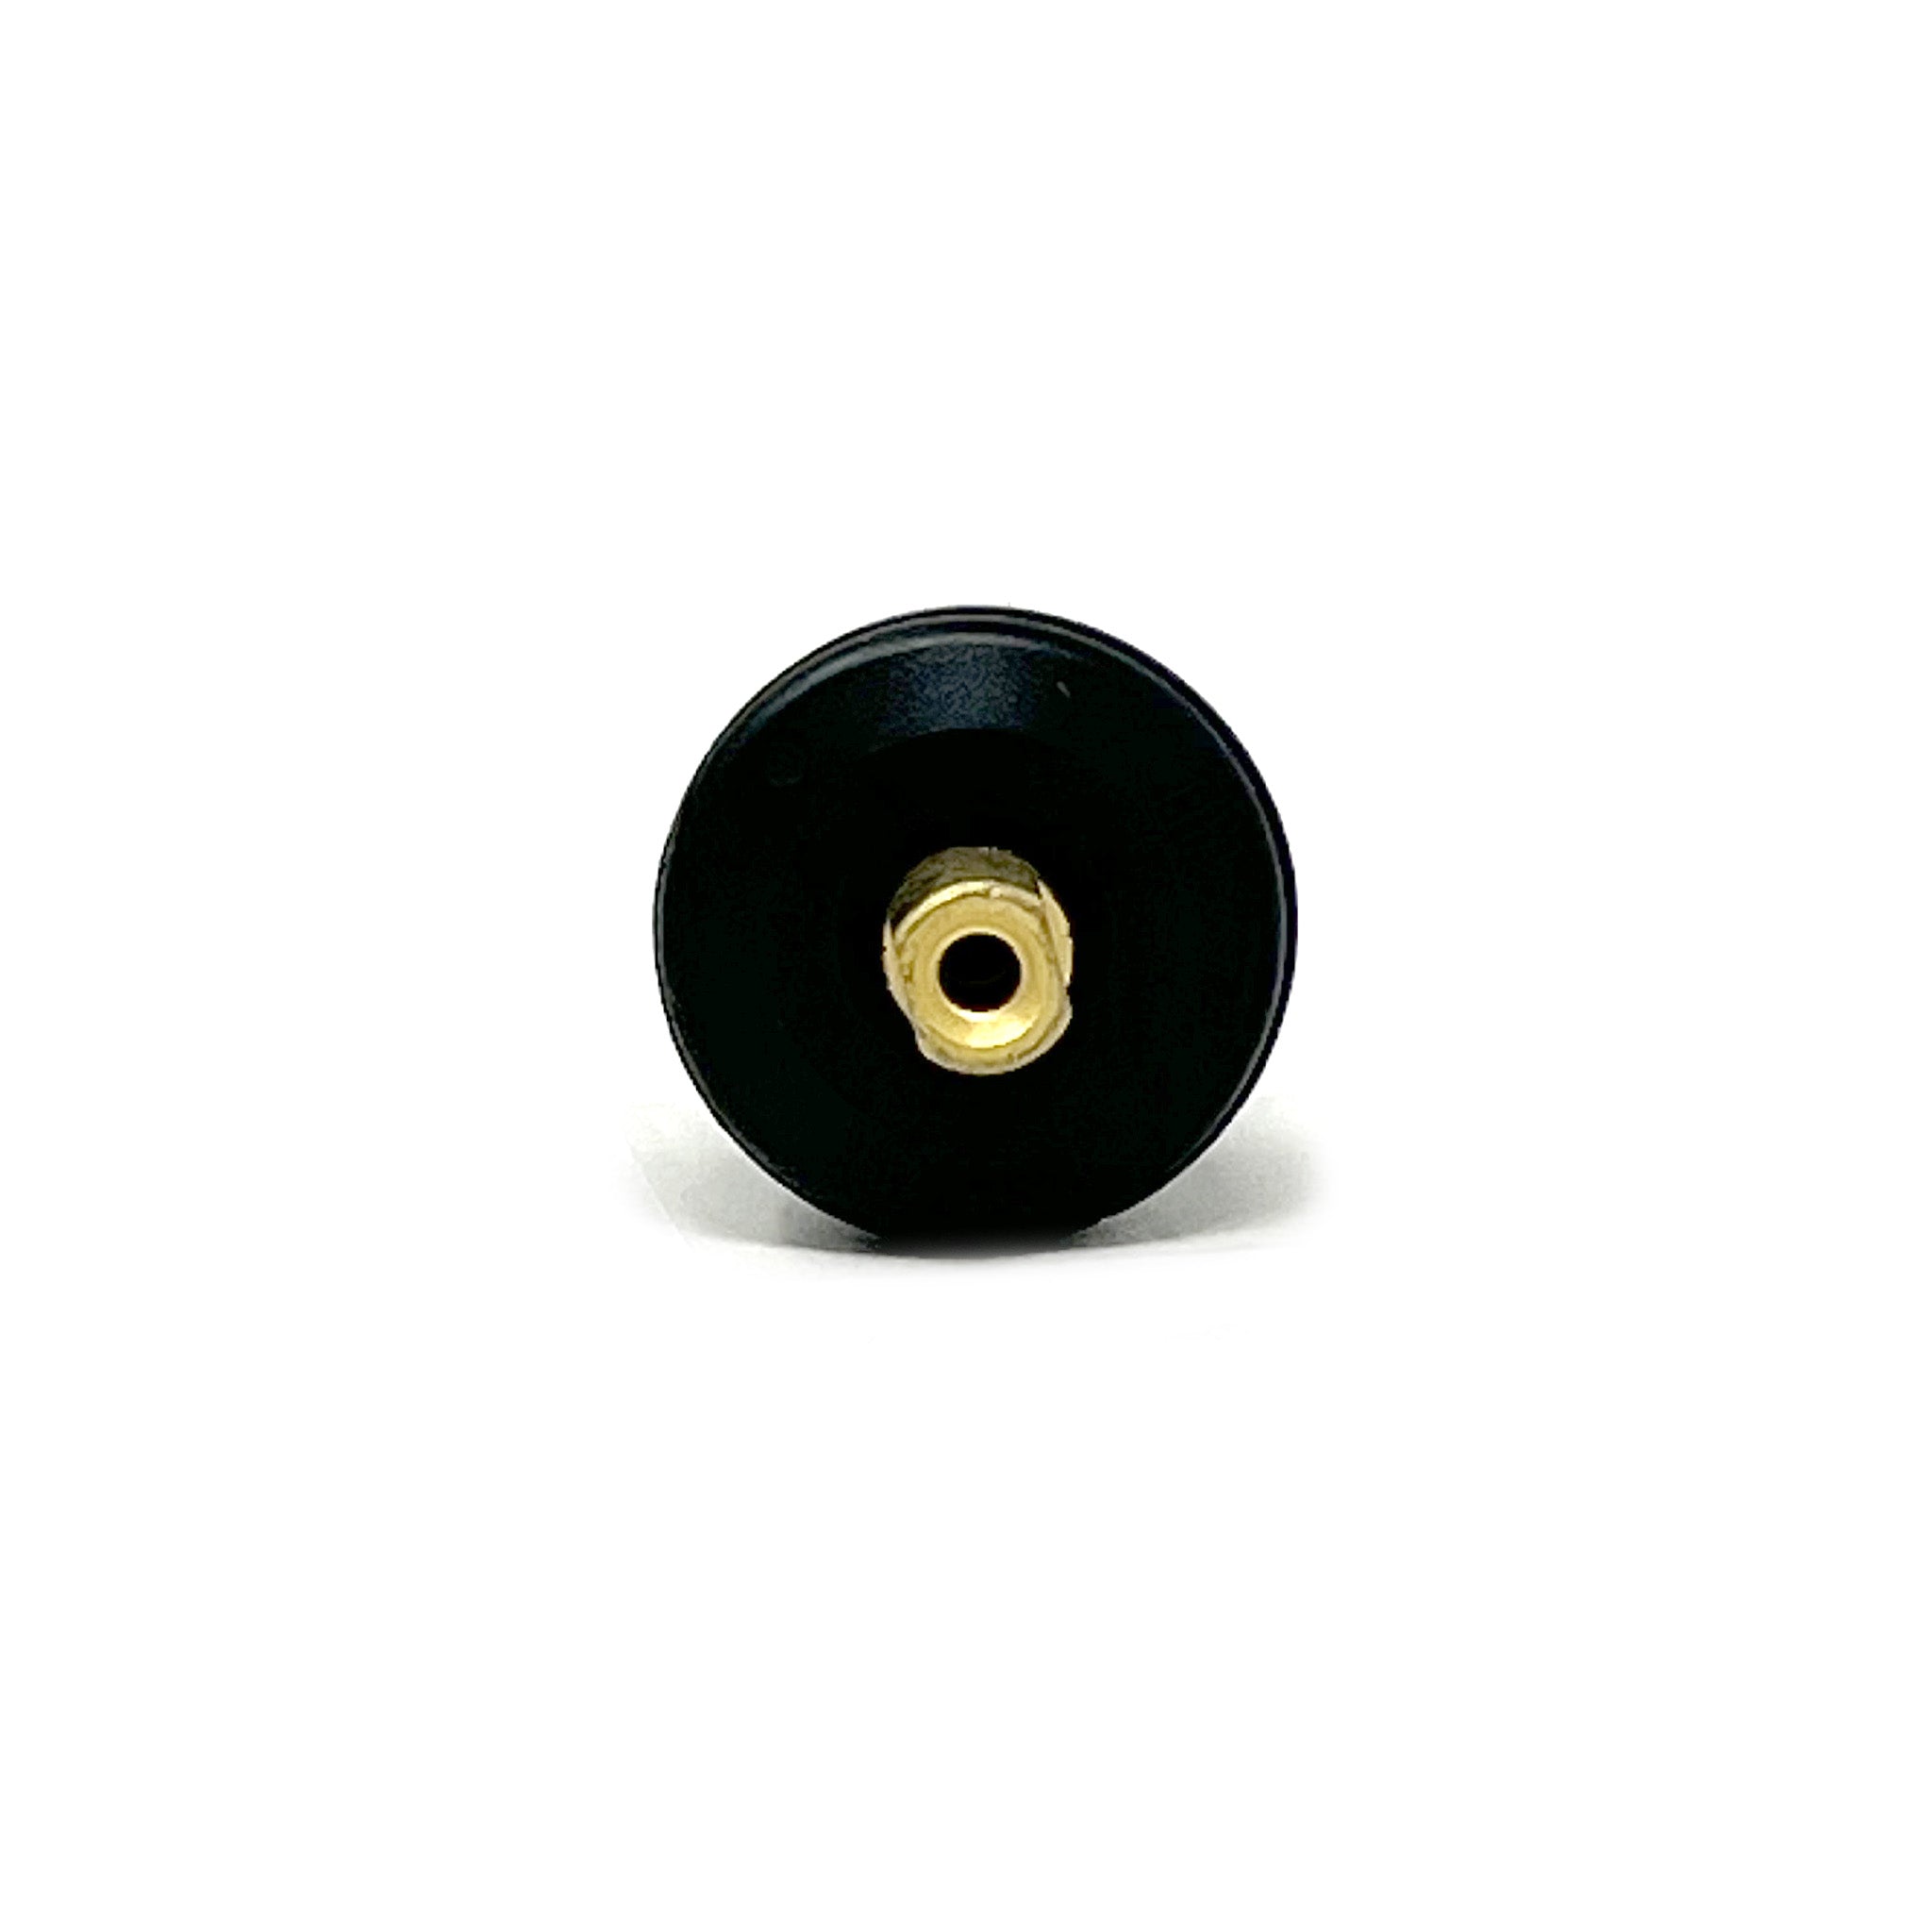 U2 Universal Rubber Snap-In TPMS Valve (20 bx)